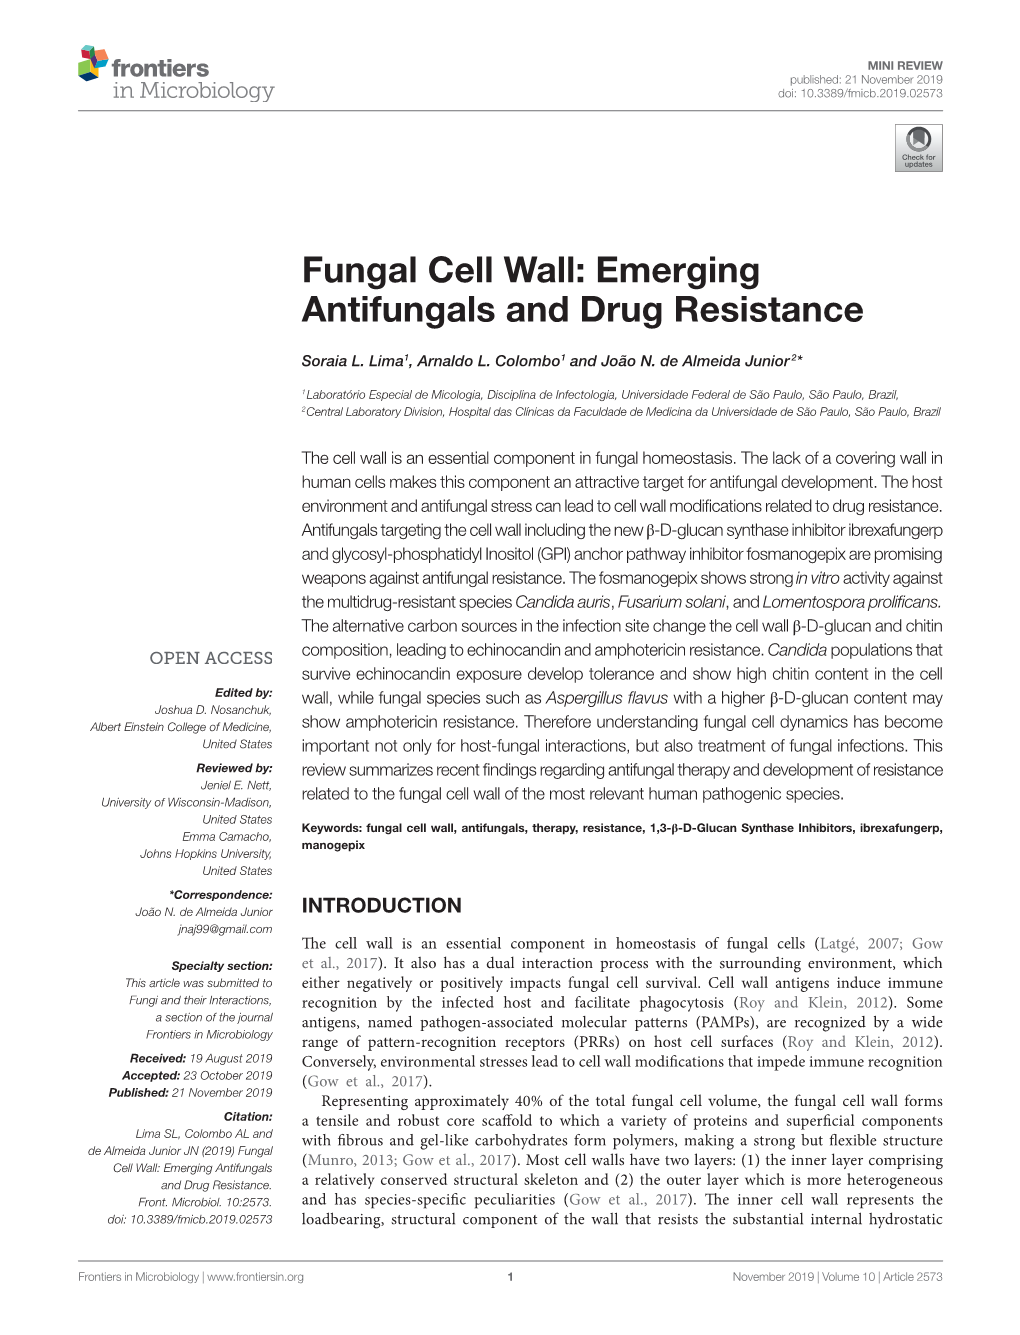 Fungal Cell Wall: Emerging Antifungals and Drug Resistance